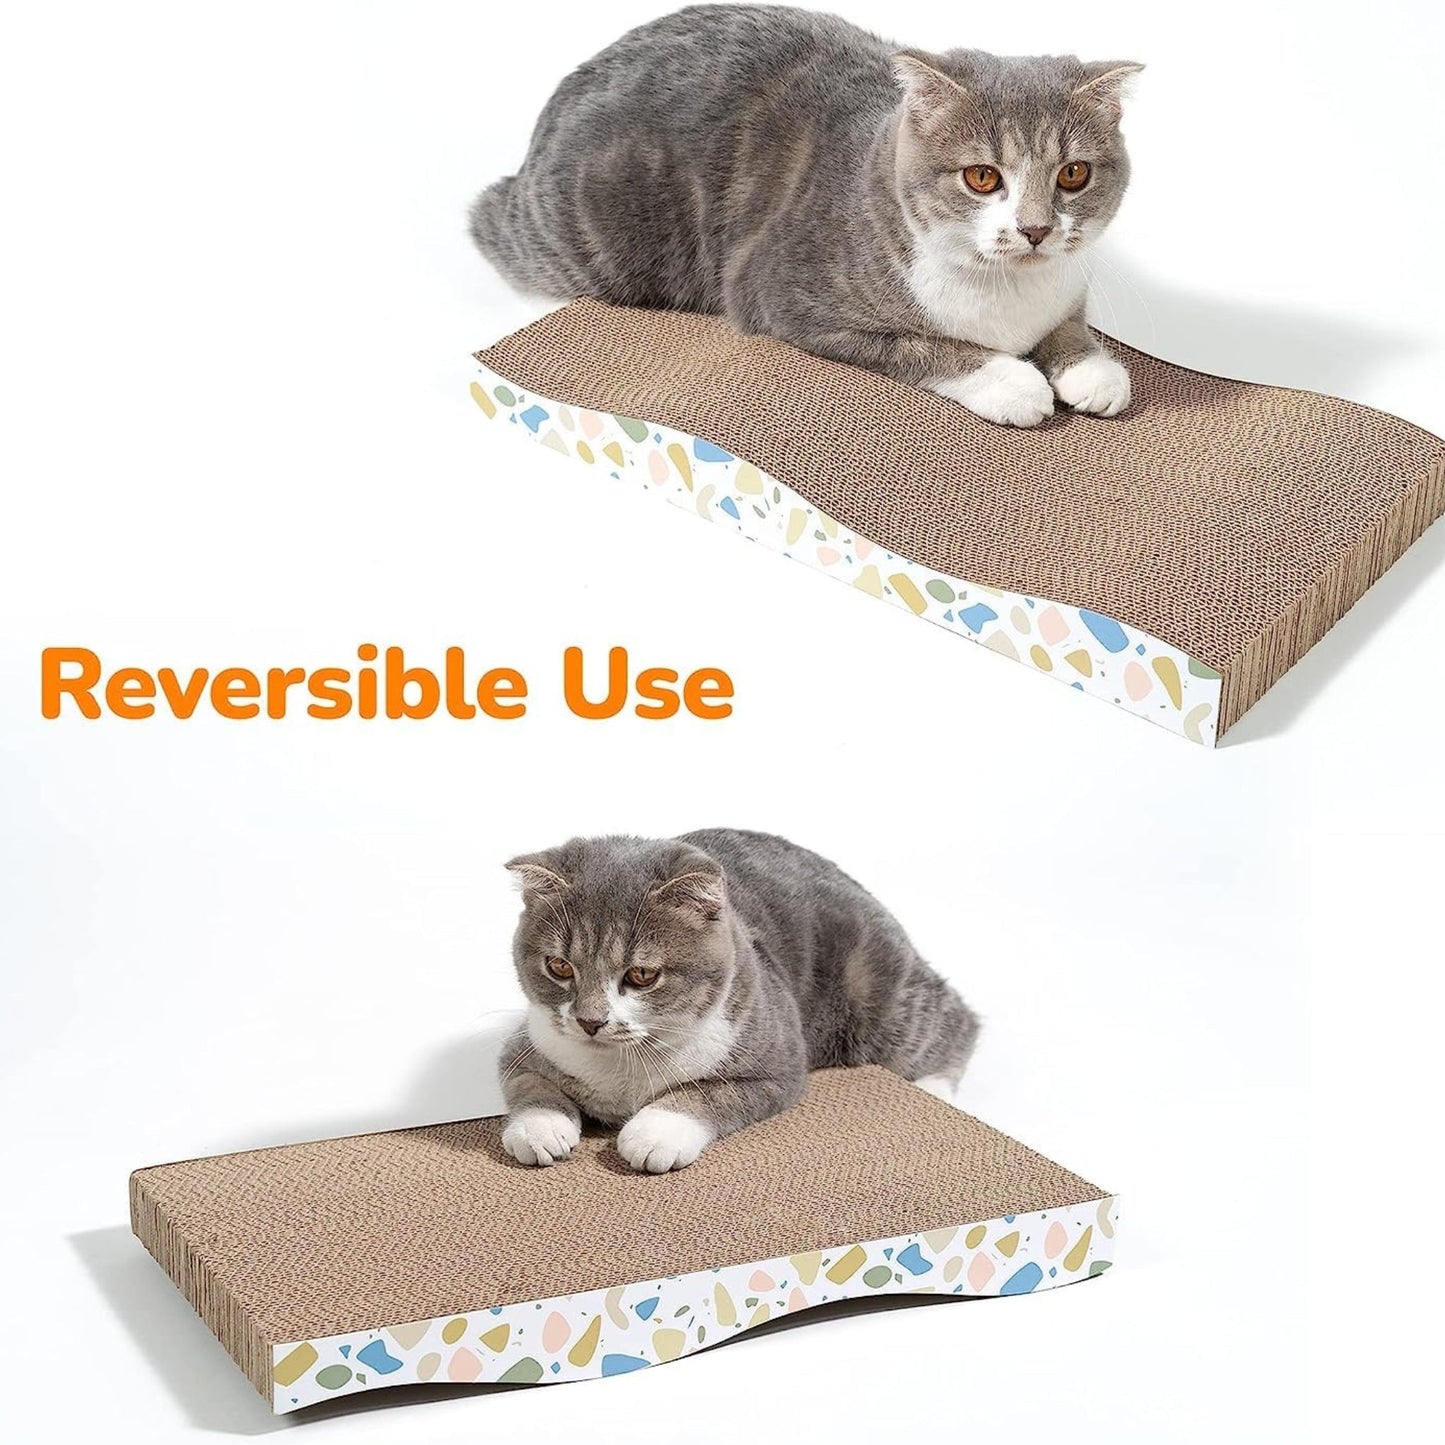 Foodie Puppies Corrugated Bumpy Road Scratcher for Cats & Kittens